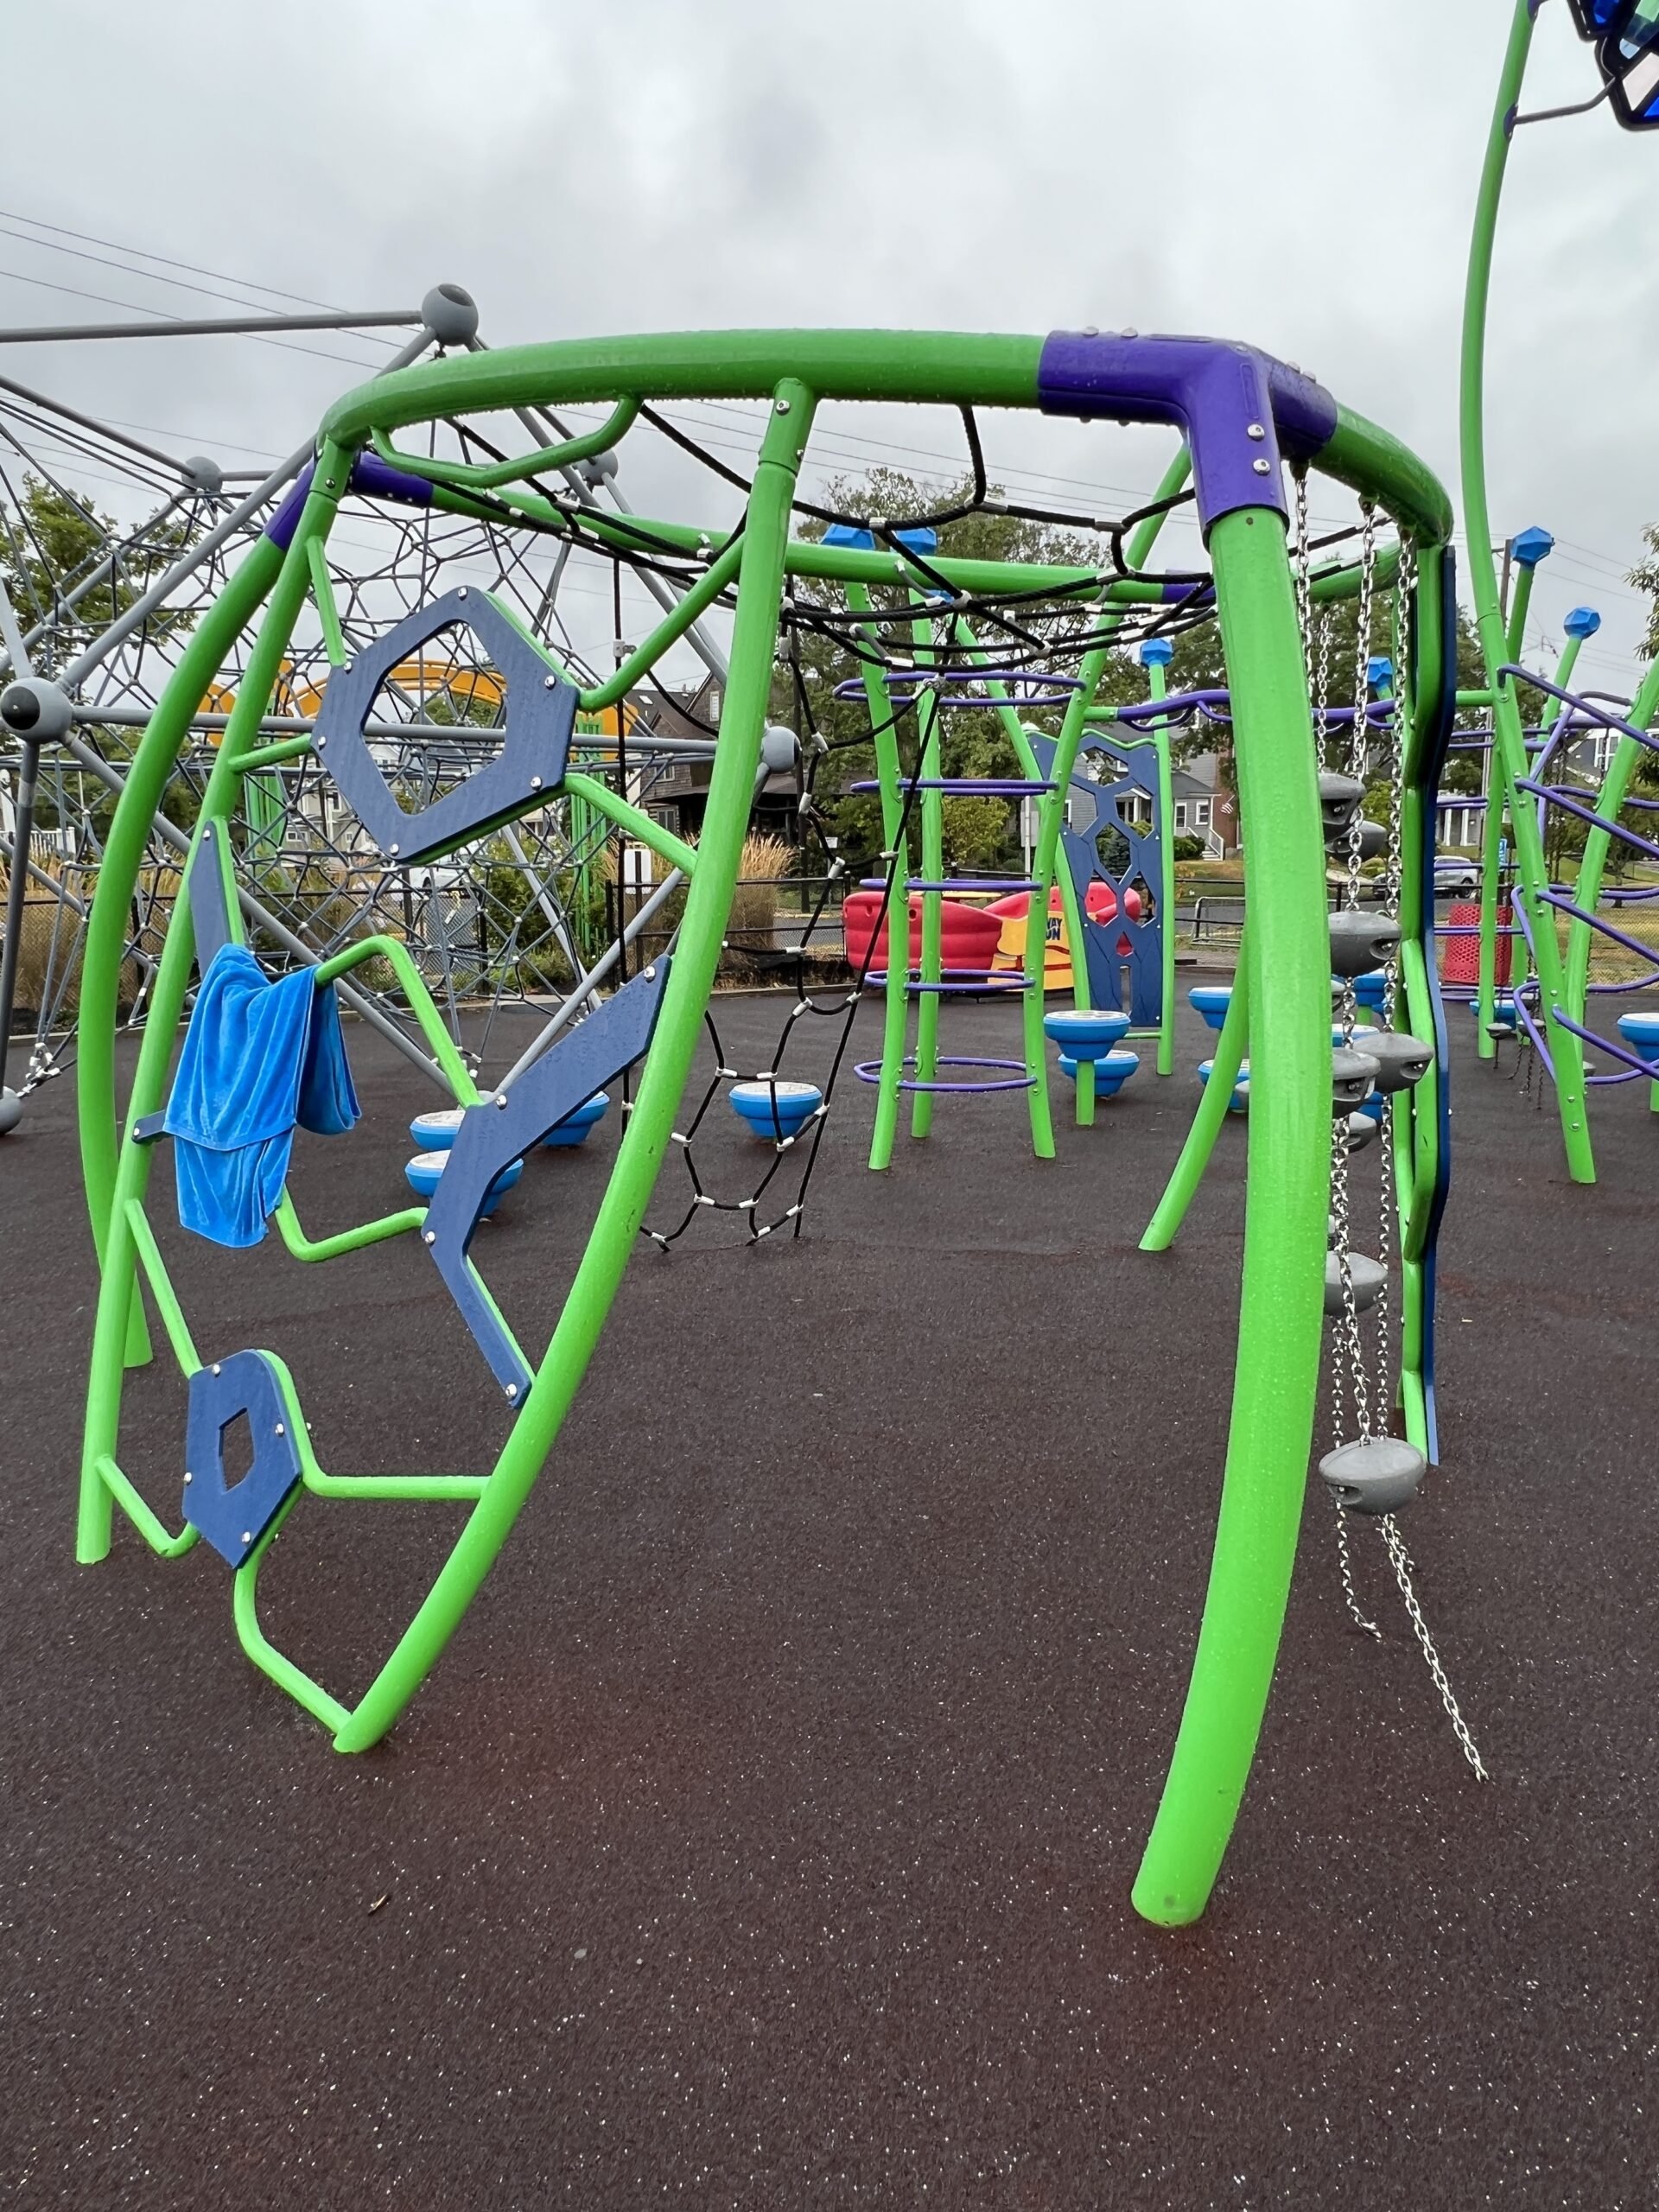 Features - Green climbing structure OUTSIDE TALL image at Jane Magovern's Playground in Belmar NJ